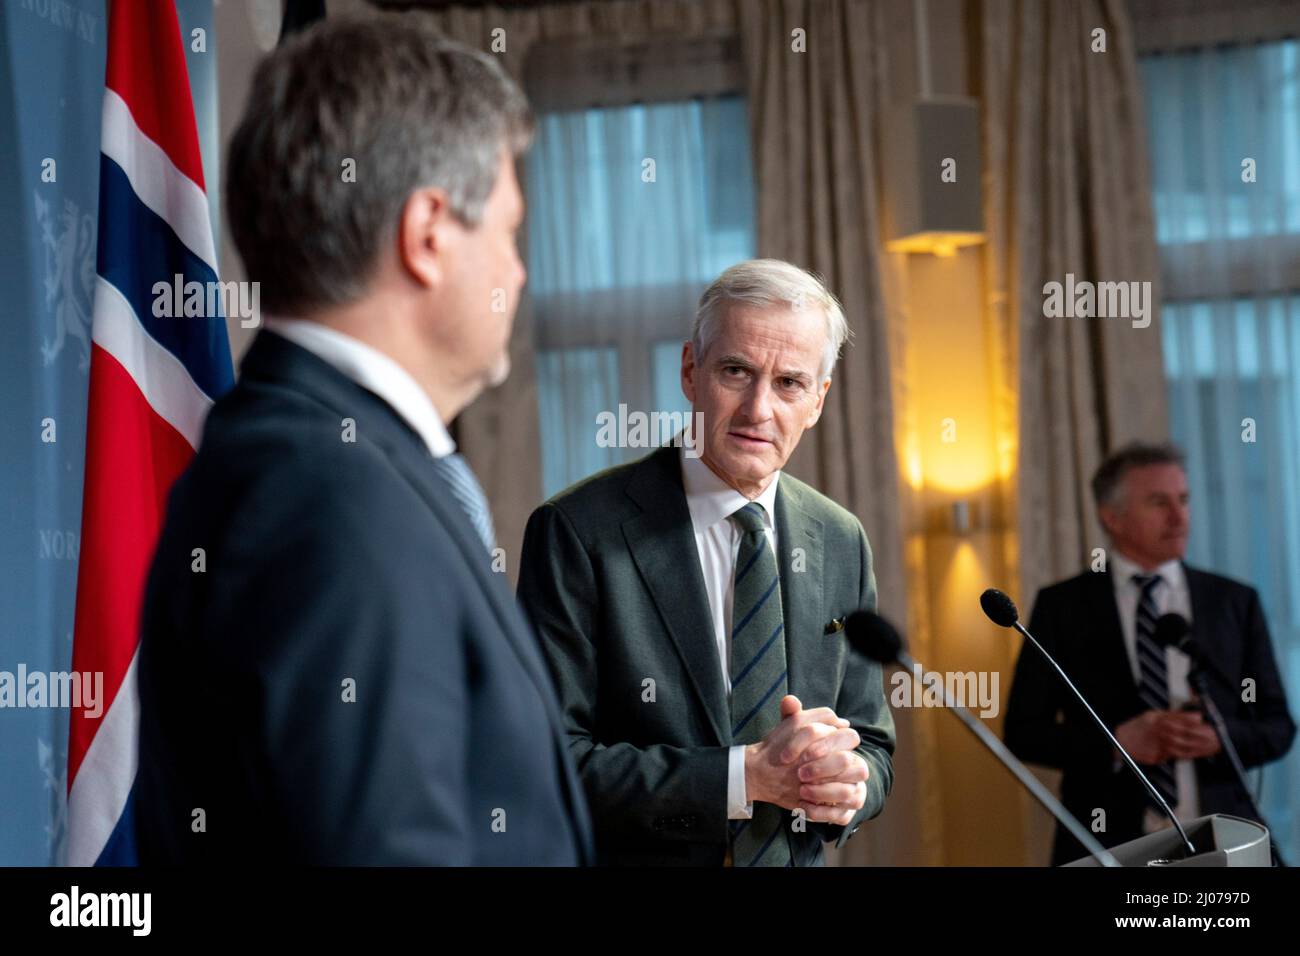 Oslo 20220316.Norway's Prime Minister Jonas Gahr Støre (Stoere) (Labor Party) meets  Robert Habeck,  Federal Minister for Economic Affairs and Climate Action in Germany. Topics for the meeting include Ukraine, energy cooperation and green transition. Photo: Torstein Boe / NTB Stock Photo